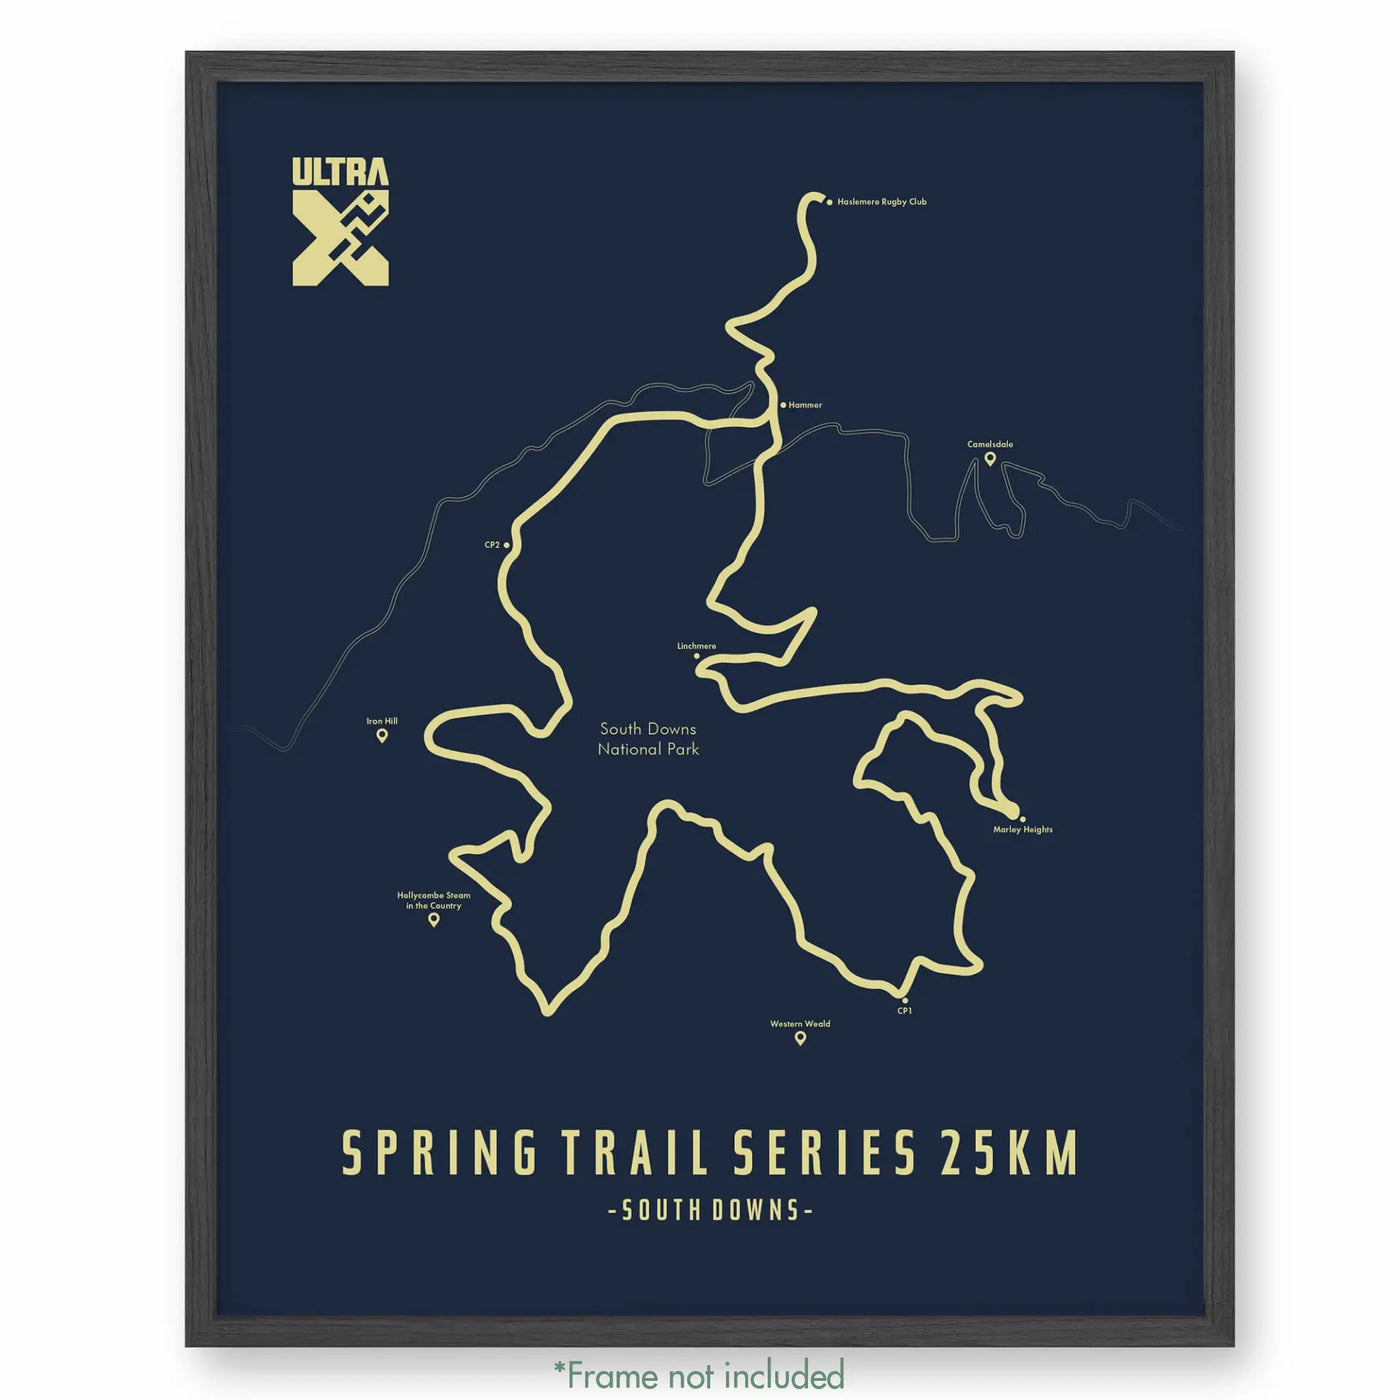 Trail Poster of Ultra X Spring Trail Series 25km - Blue